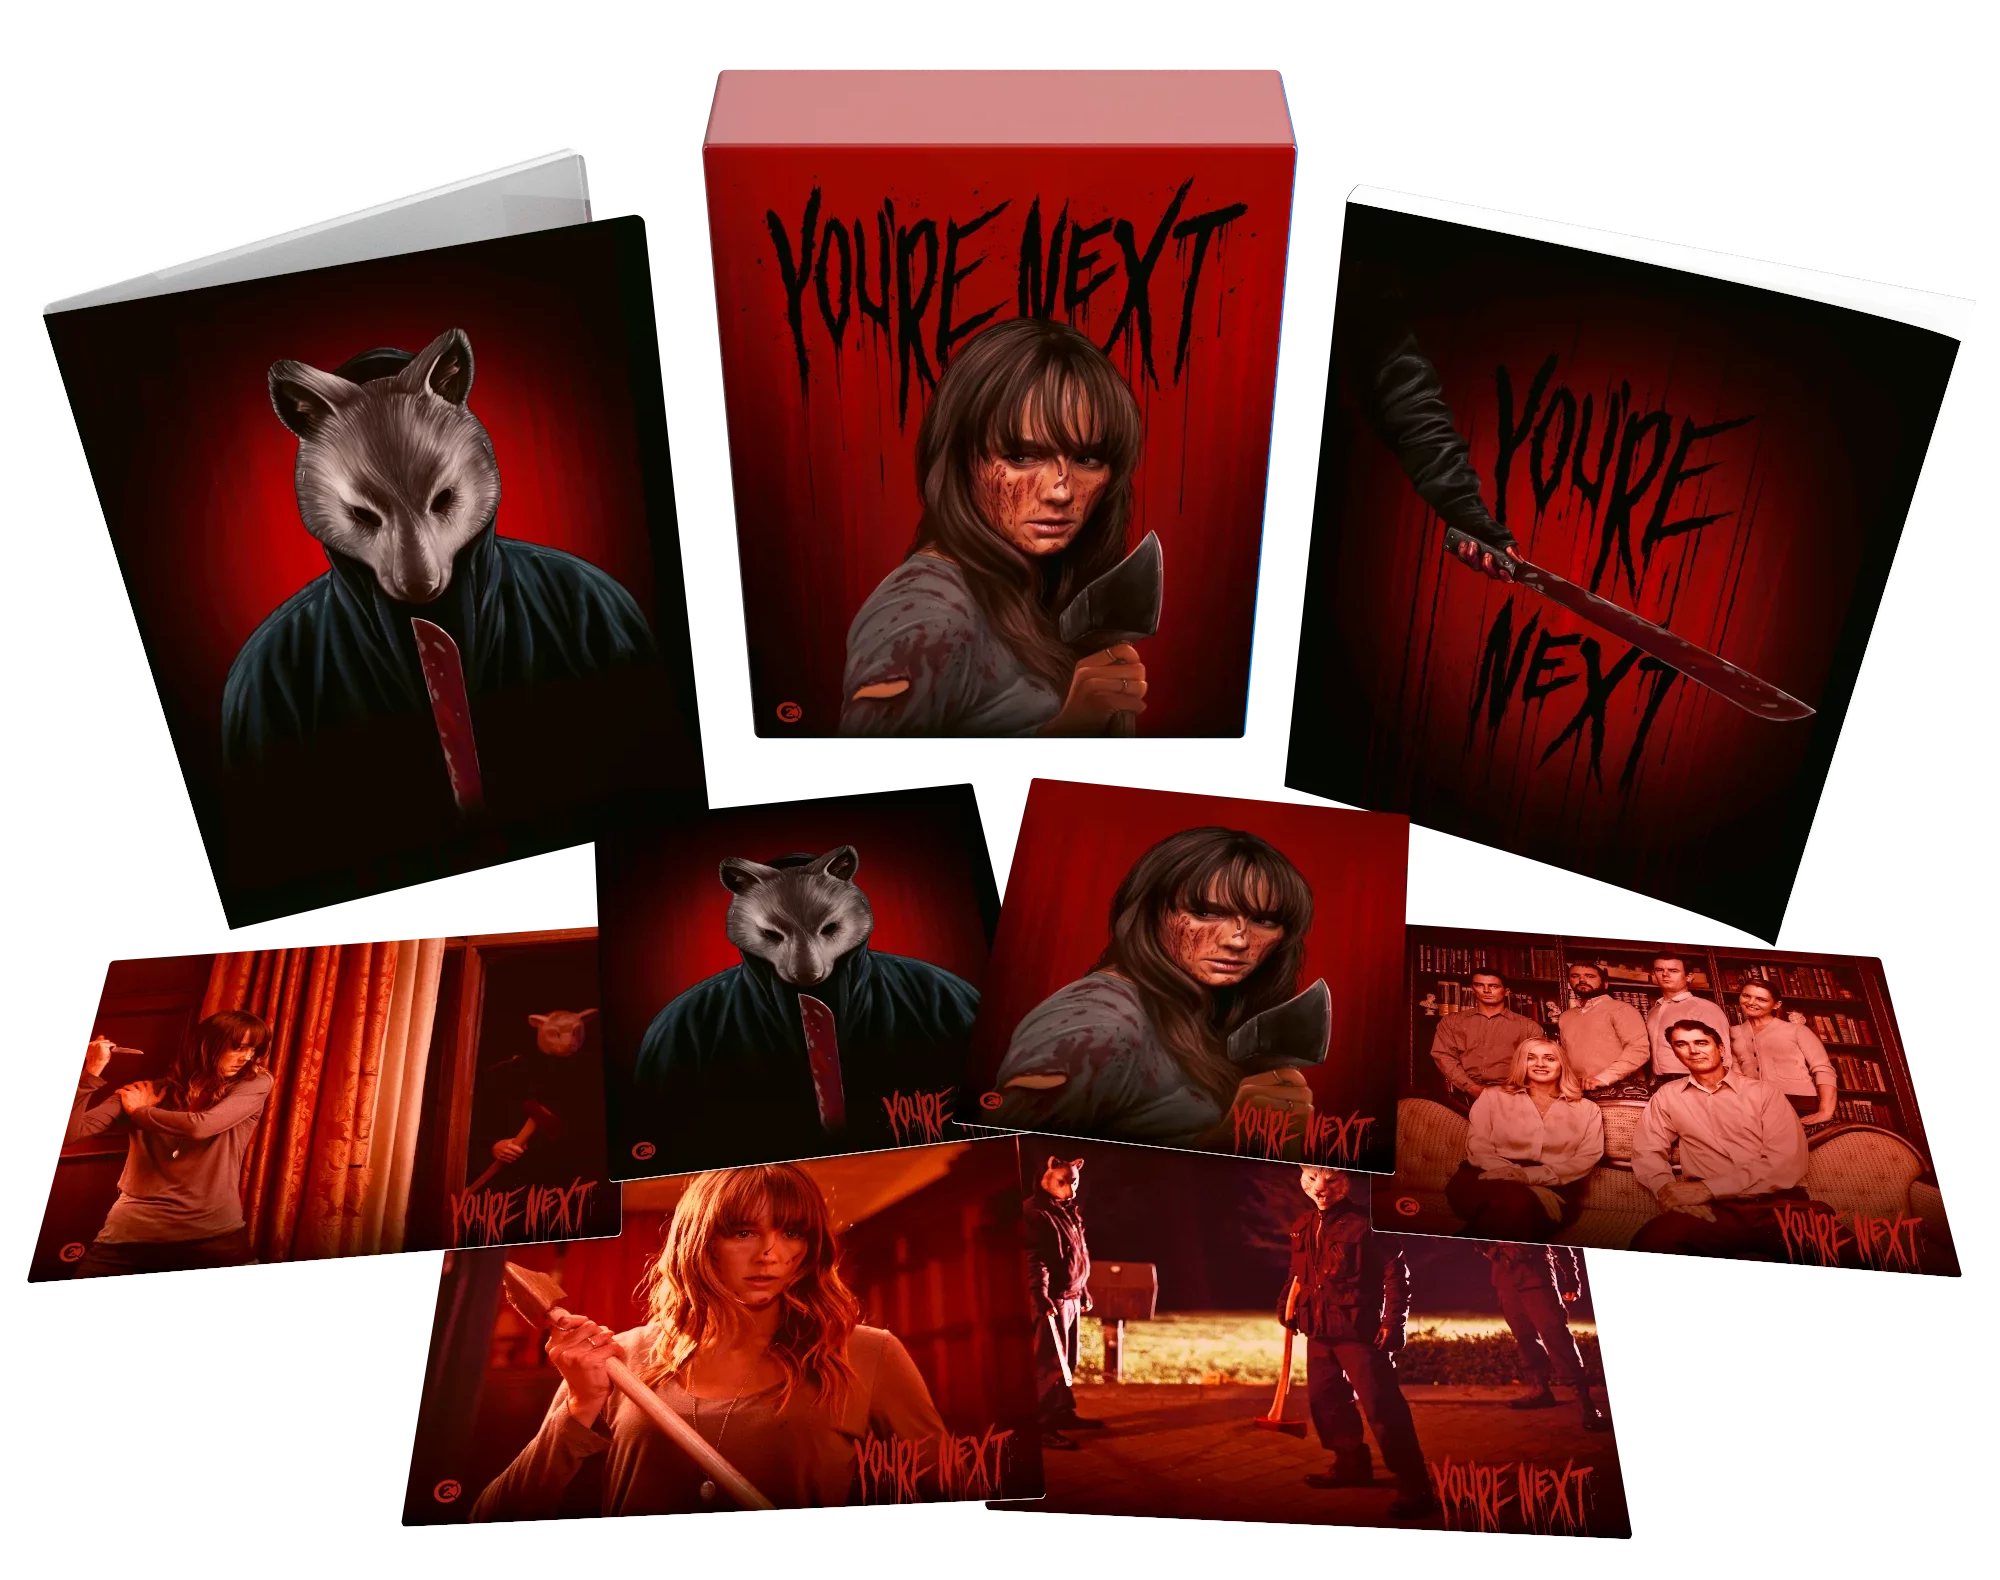 You're Next 4K UHD Limited Edition